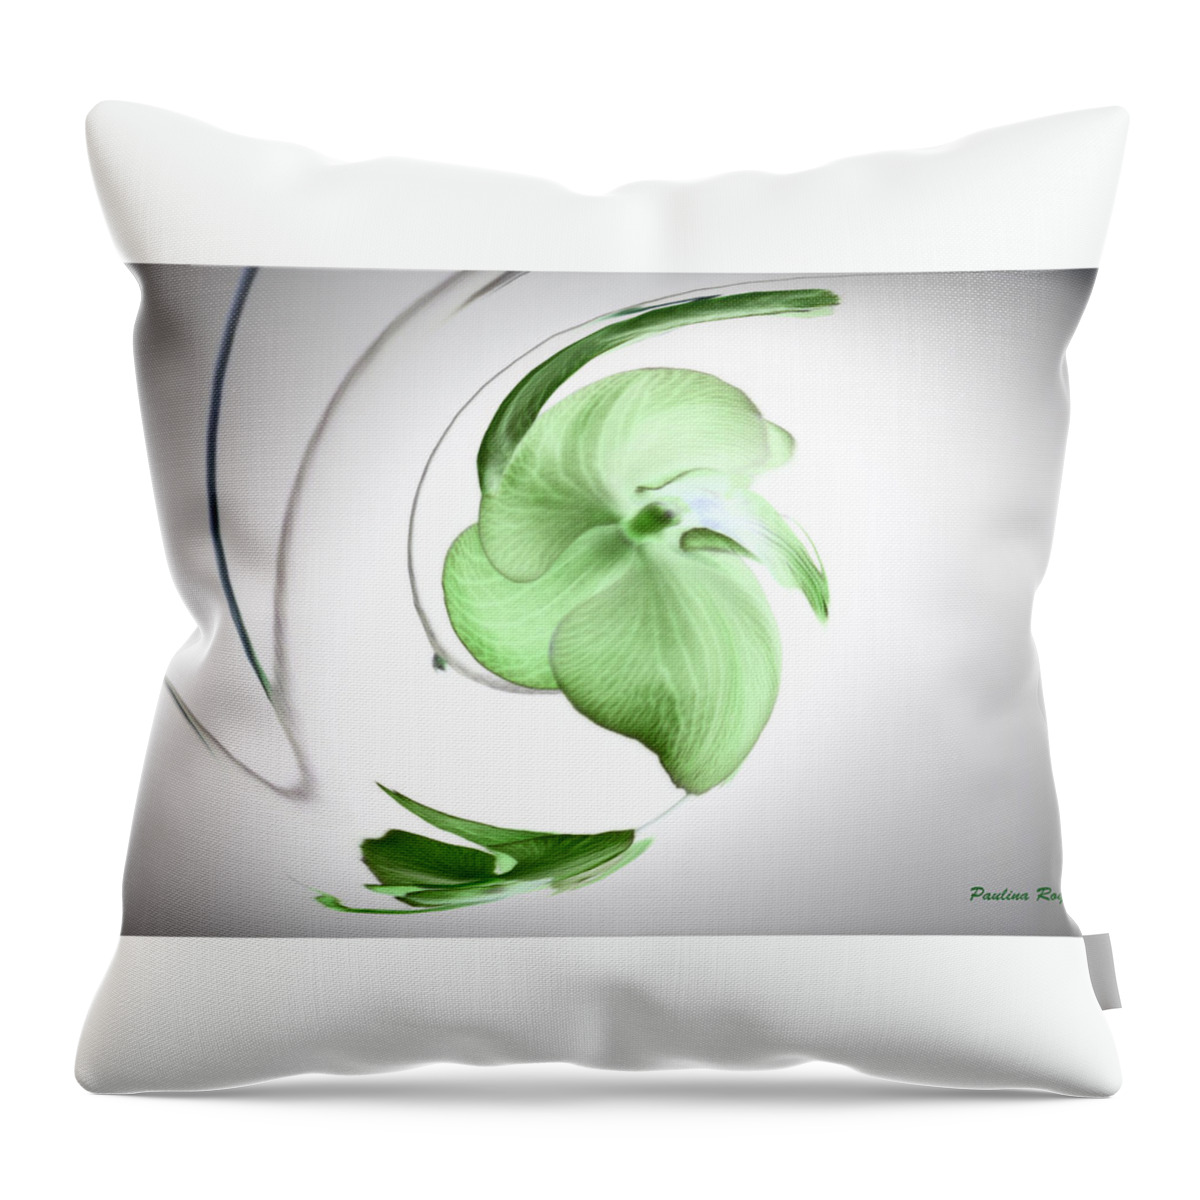 Abstract Phototgraphy Throw Pillow featuring the photograph Floral Abstract by Paulina Roybal